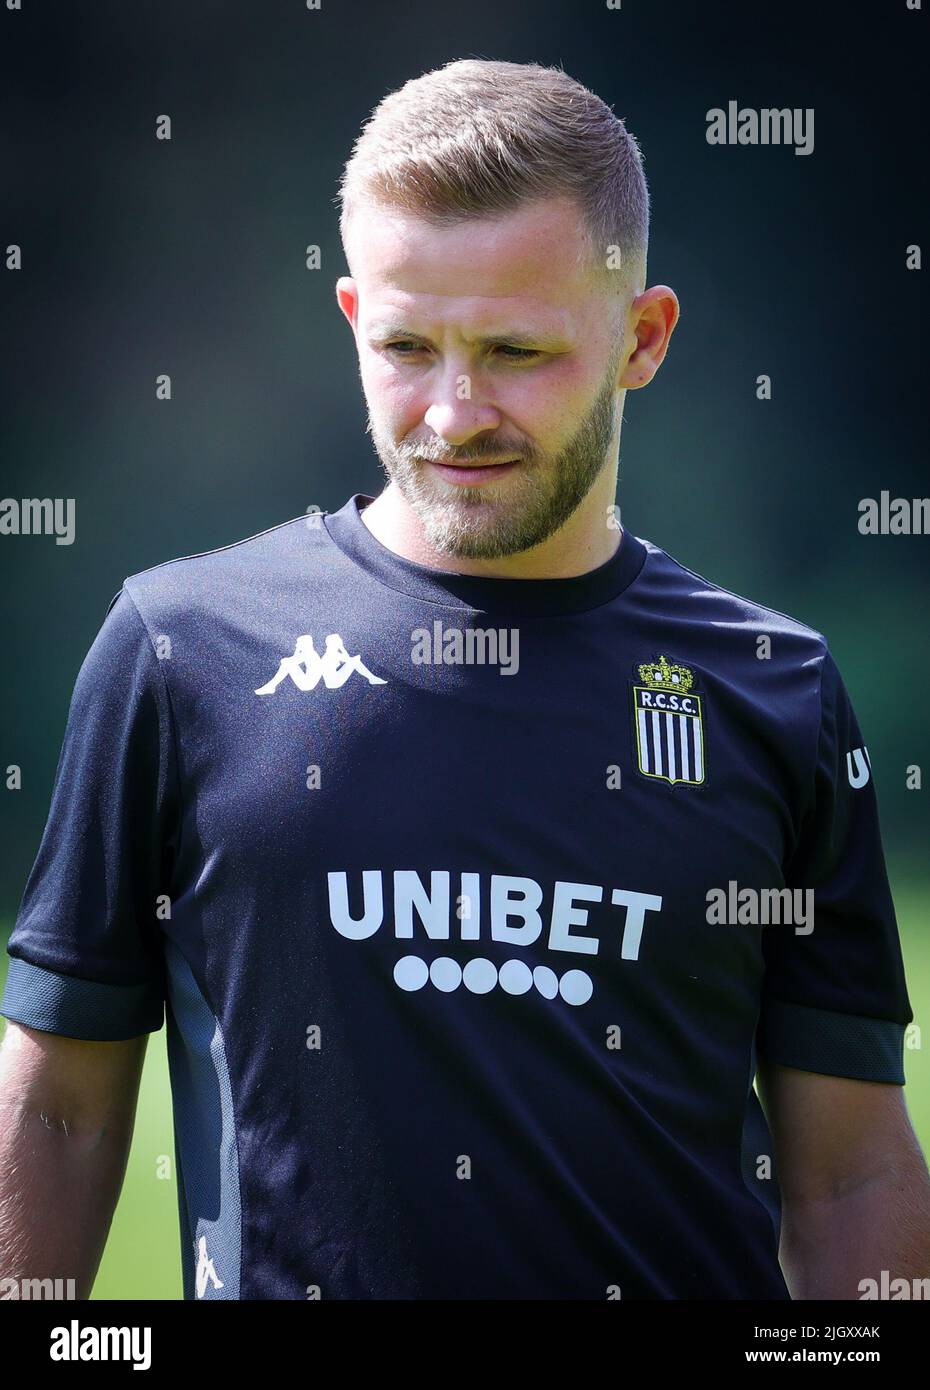 Garderen, The Netherlands. 13 July 2022, Charleroi's new player Jonas Bager  pictured during a training session of Belgian first division soccer team  Sporting Charleroi ahead of the 2022-2023 season, Wednesday 13 July